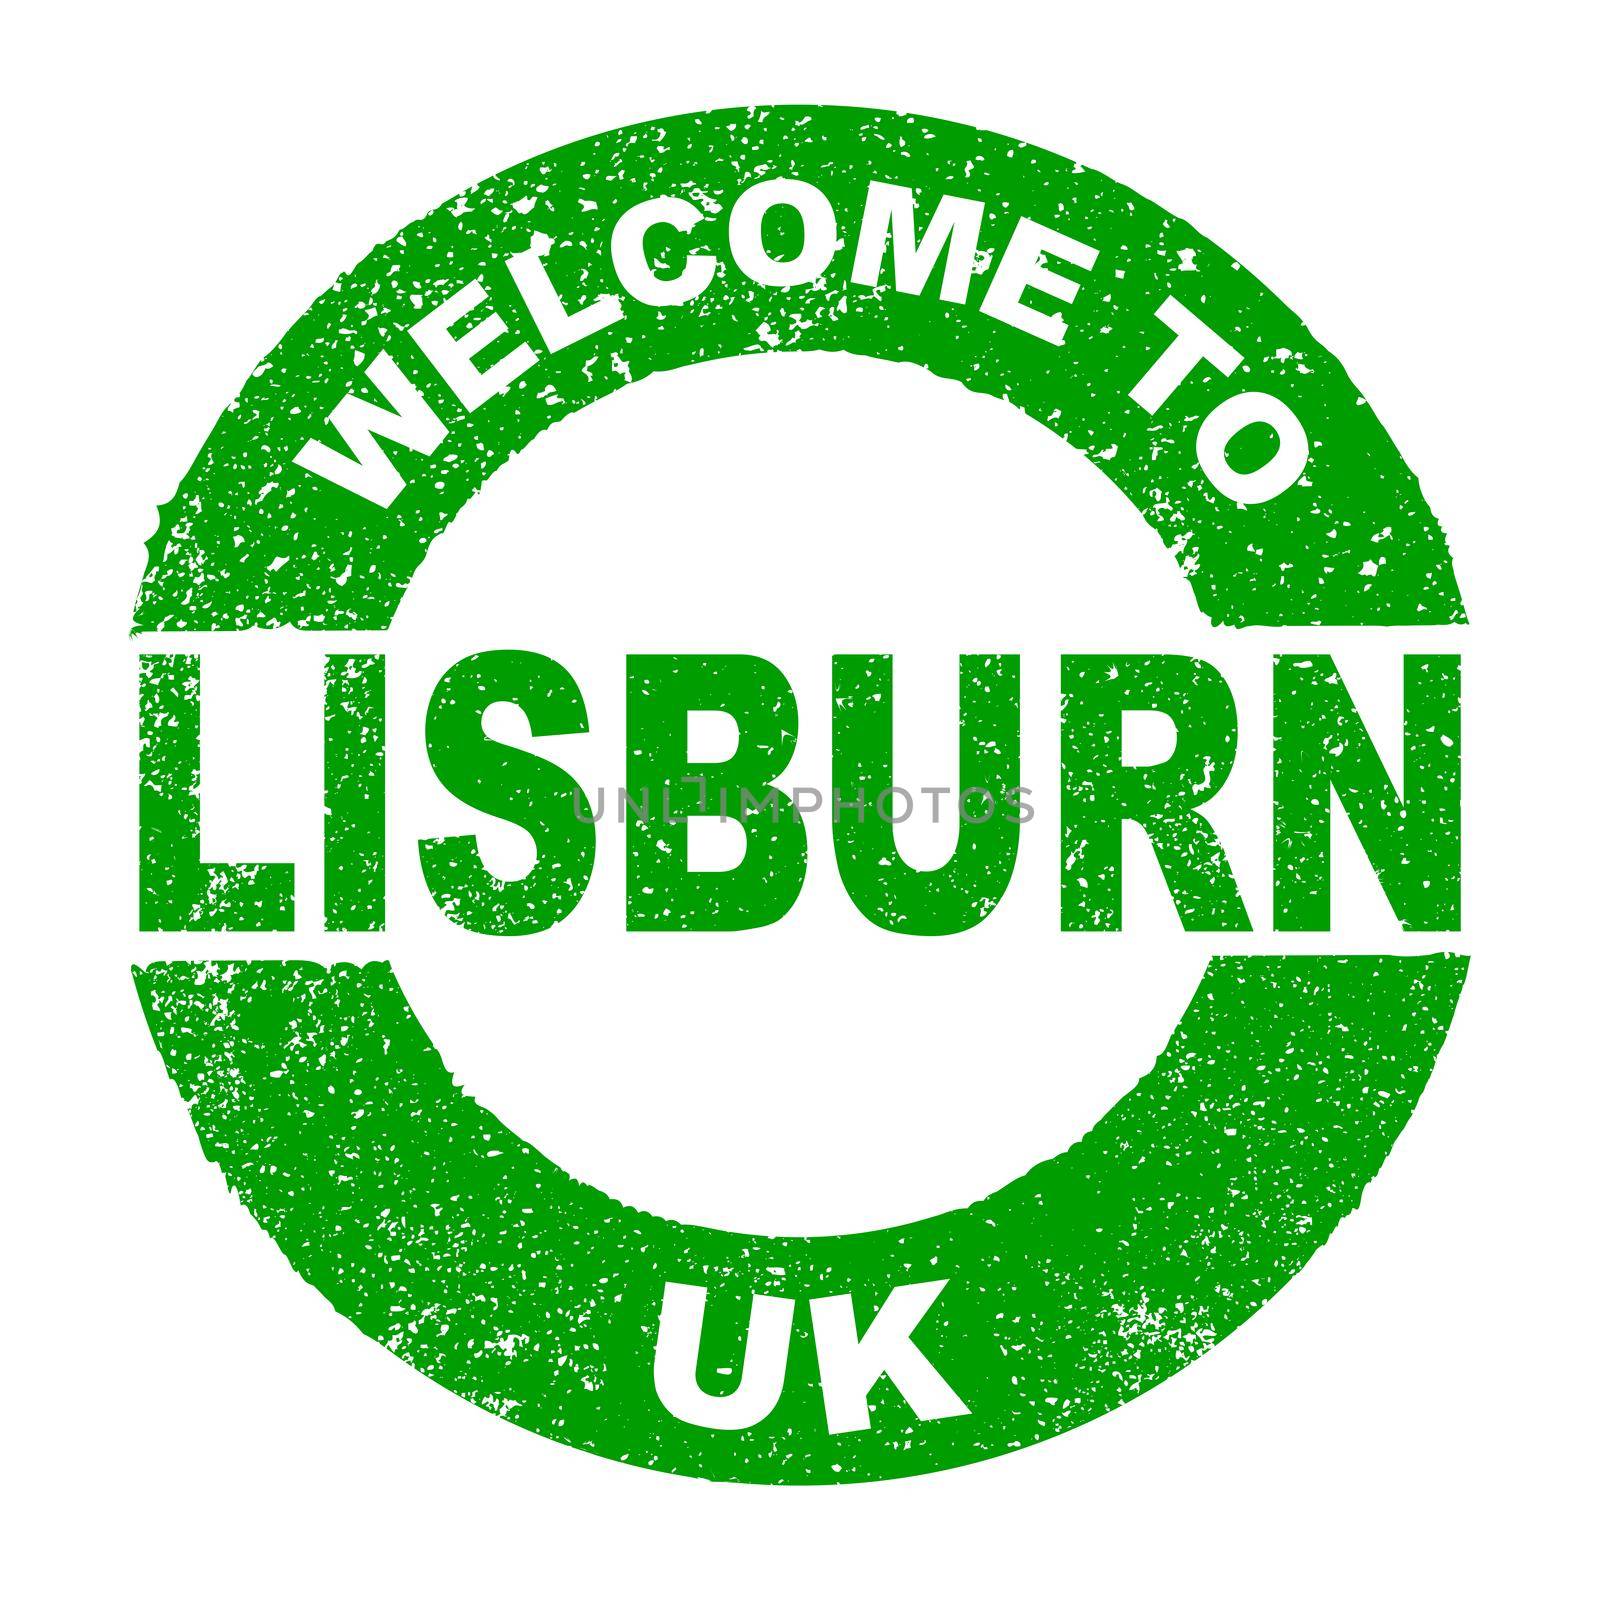 A grunge rubber ink stamp with the text Welcome To Lisburn UK over a white background